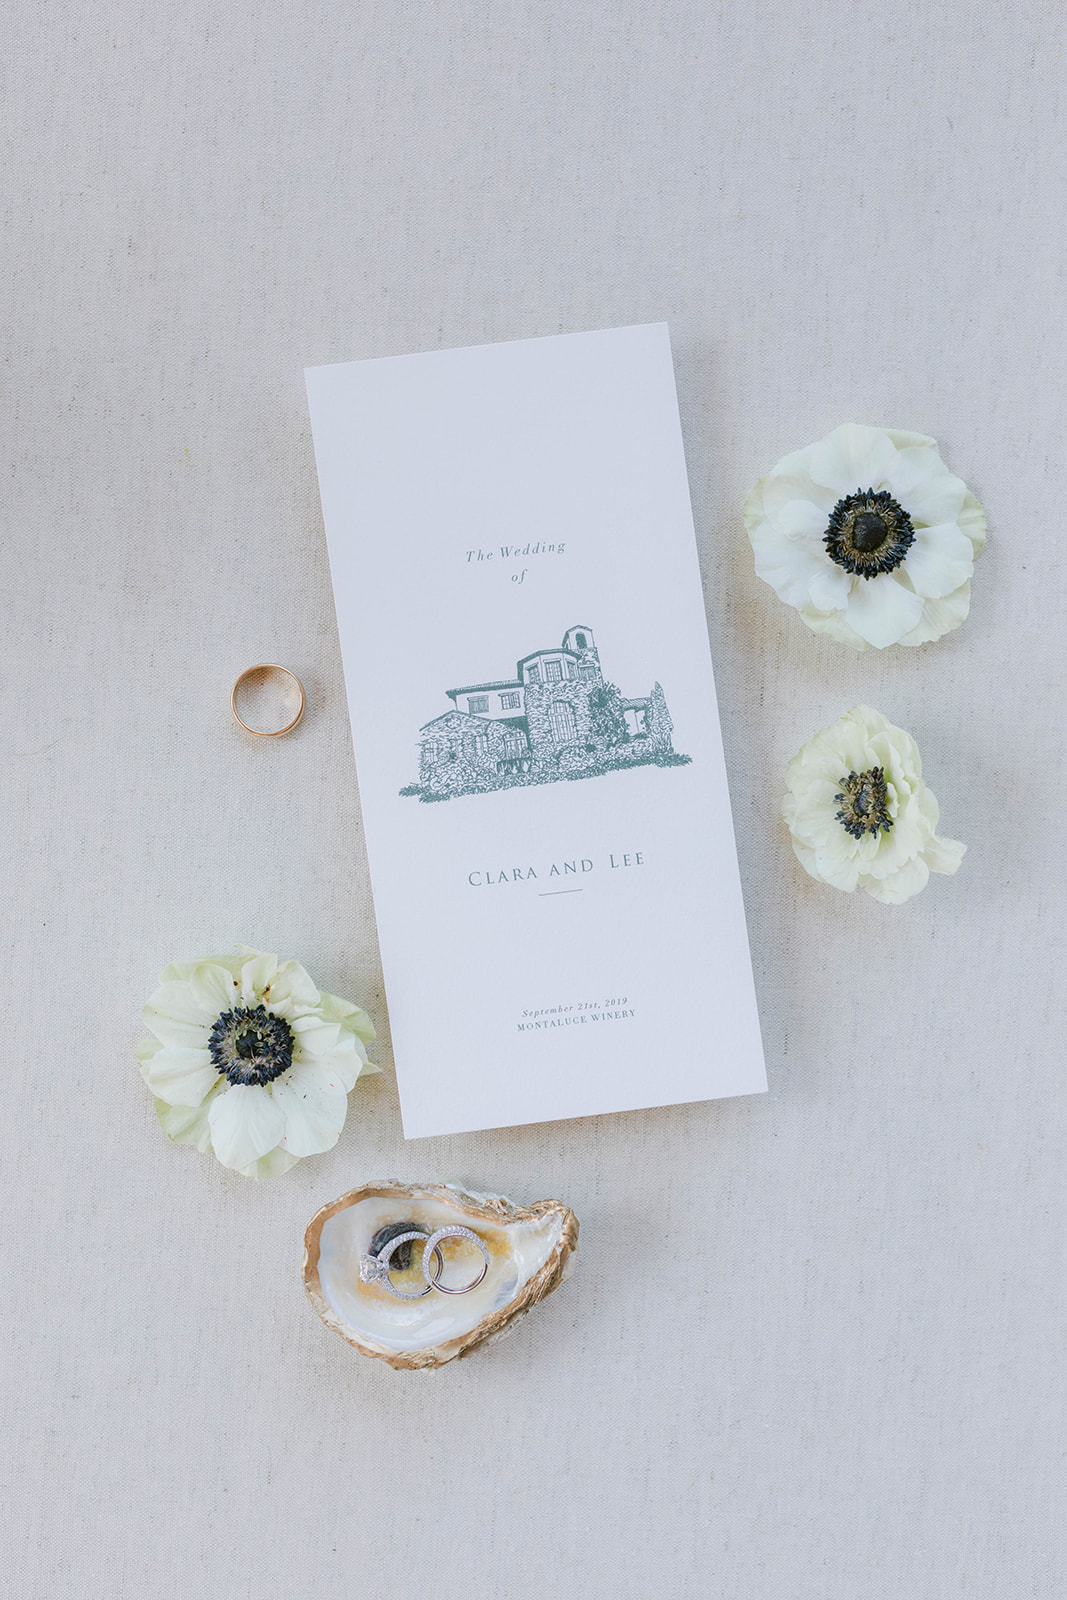 stationery and accessories pictured with anemone flowers